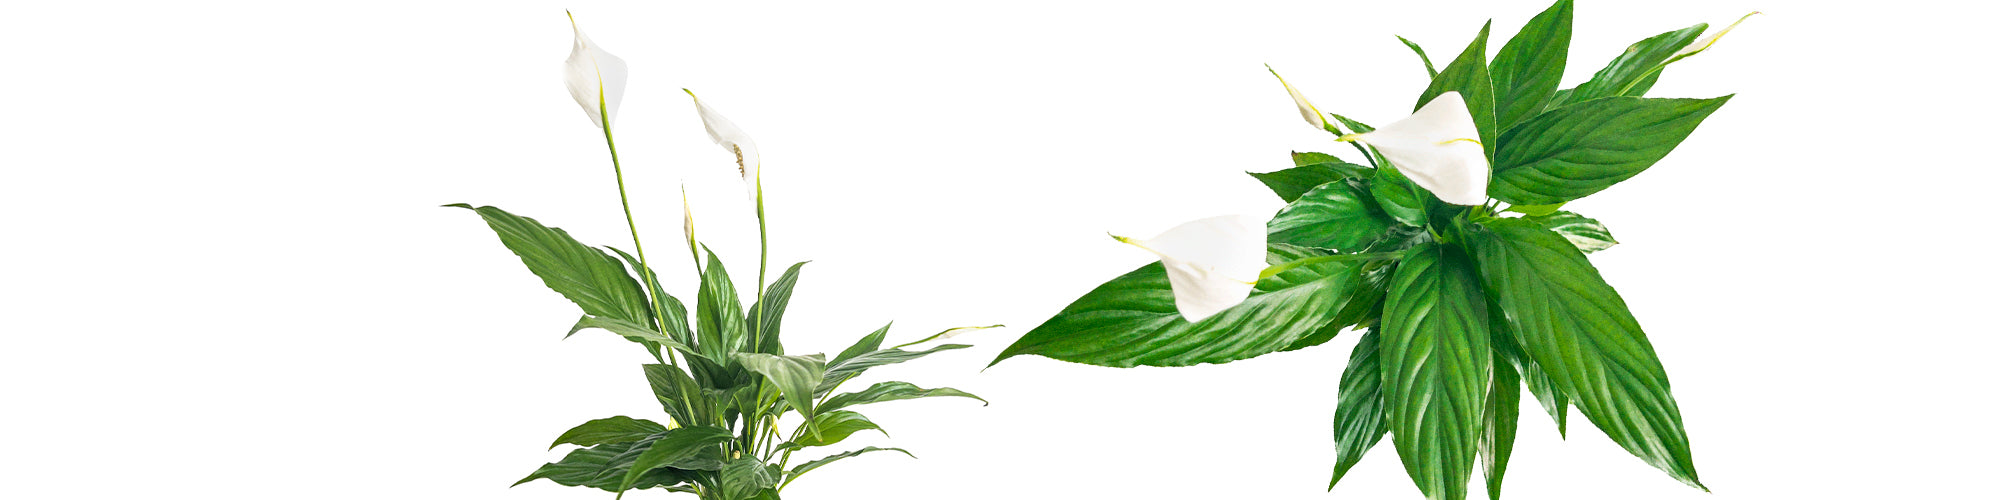 Peace Lily Flower Bunch